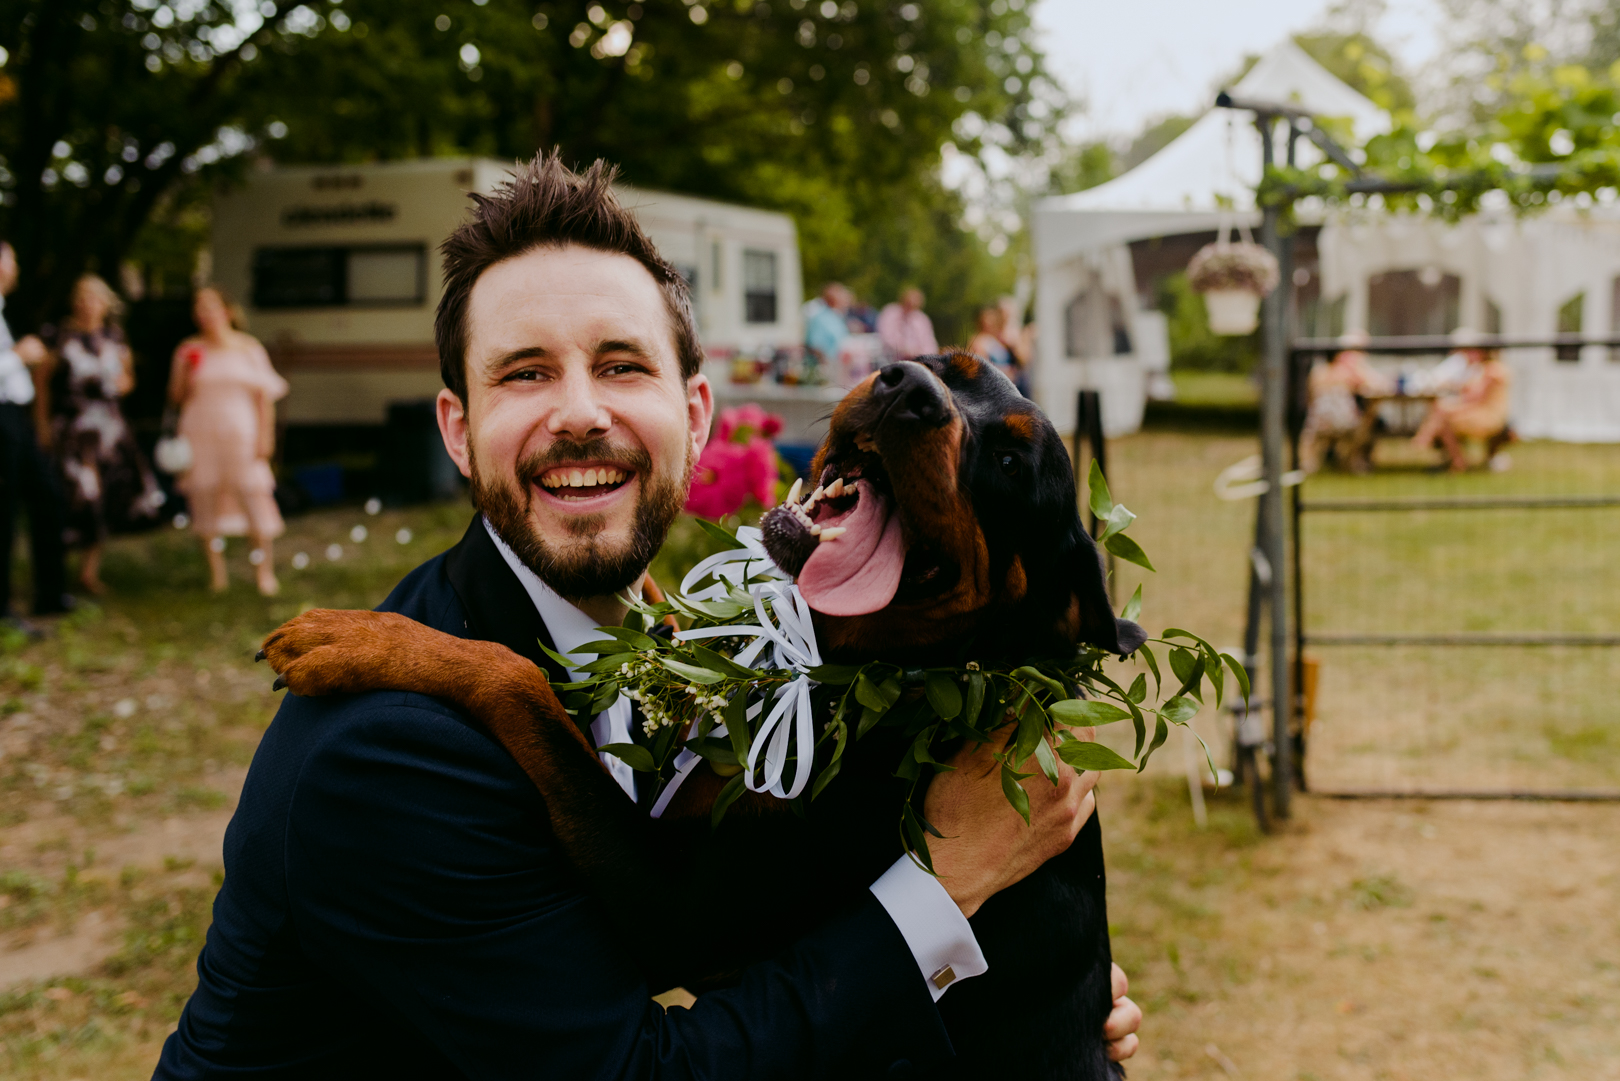 dog smiling with groom on his wedding day